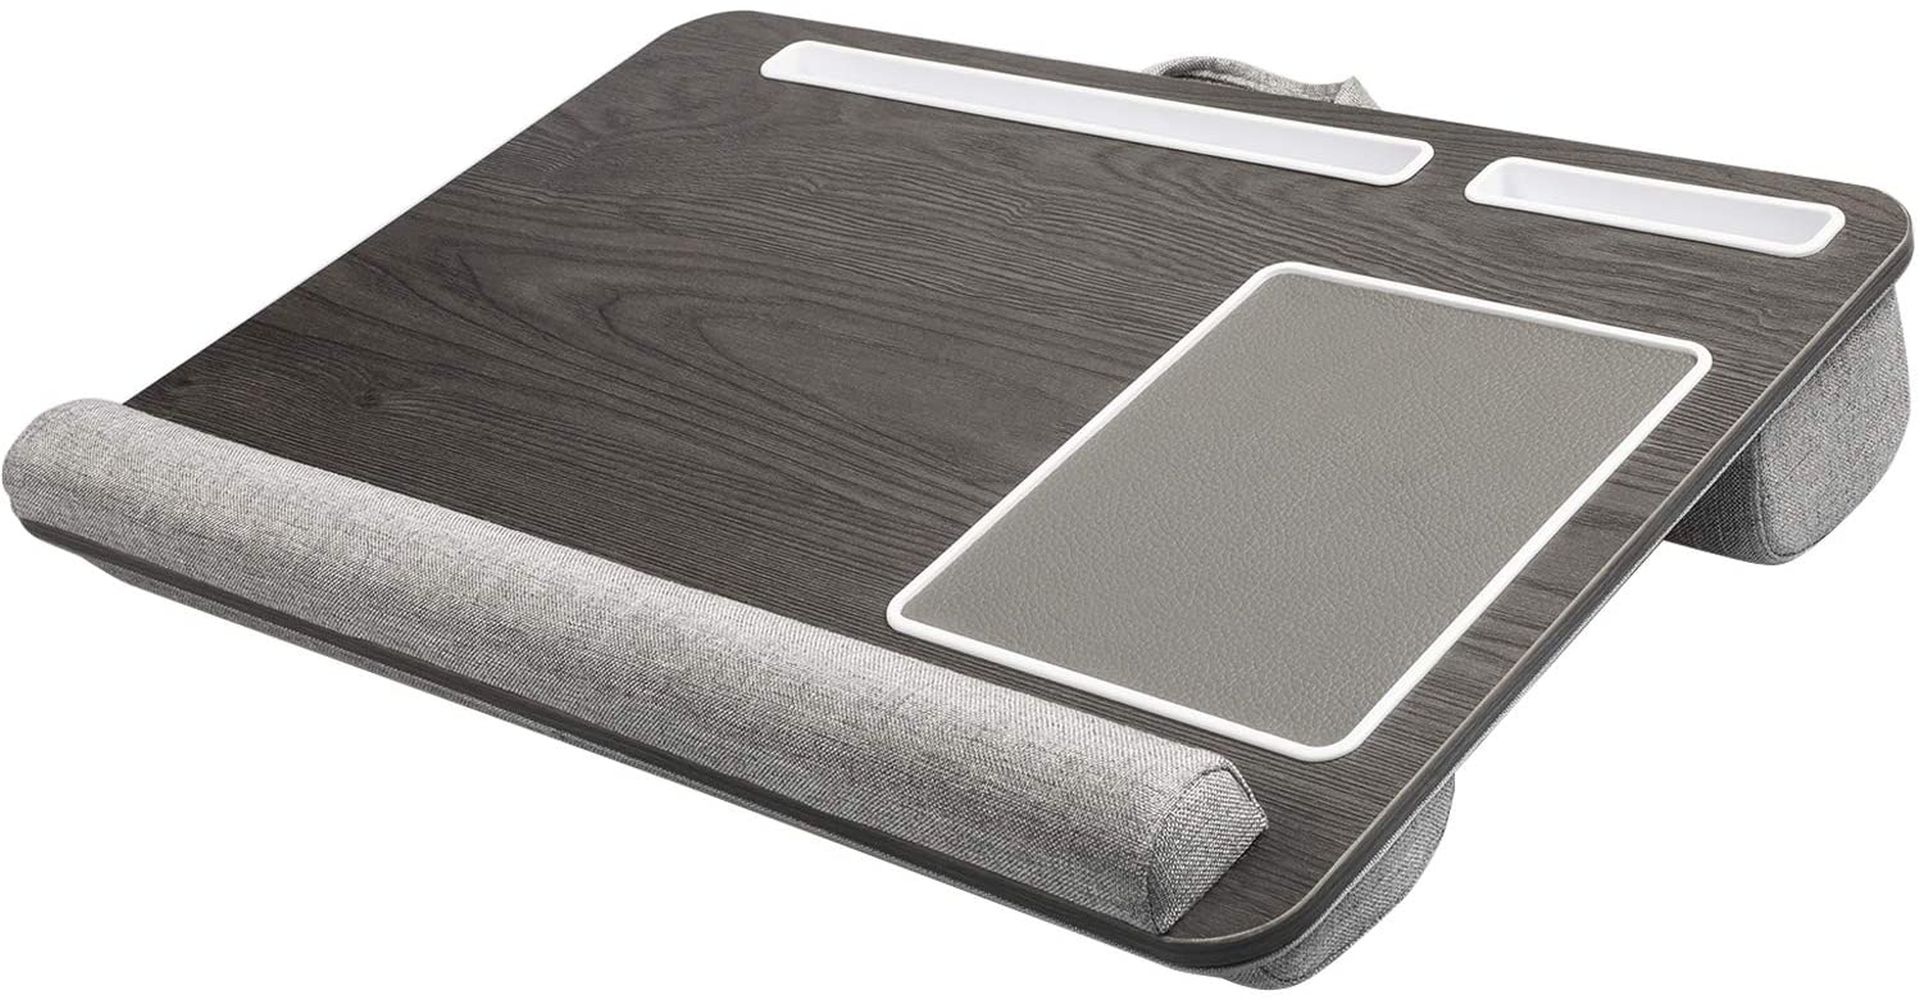 Huanuo Laptop Tray for Bed